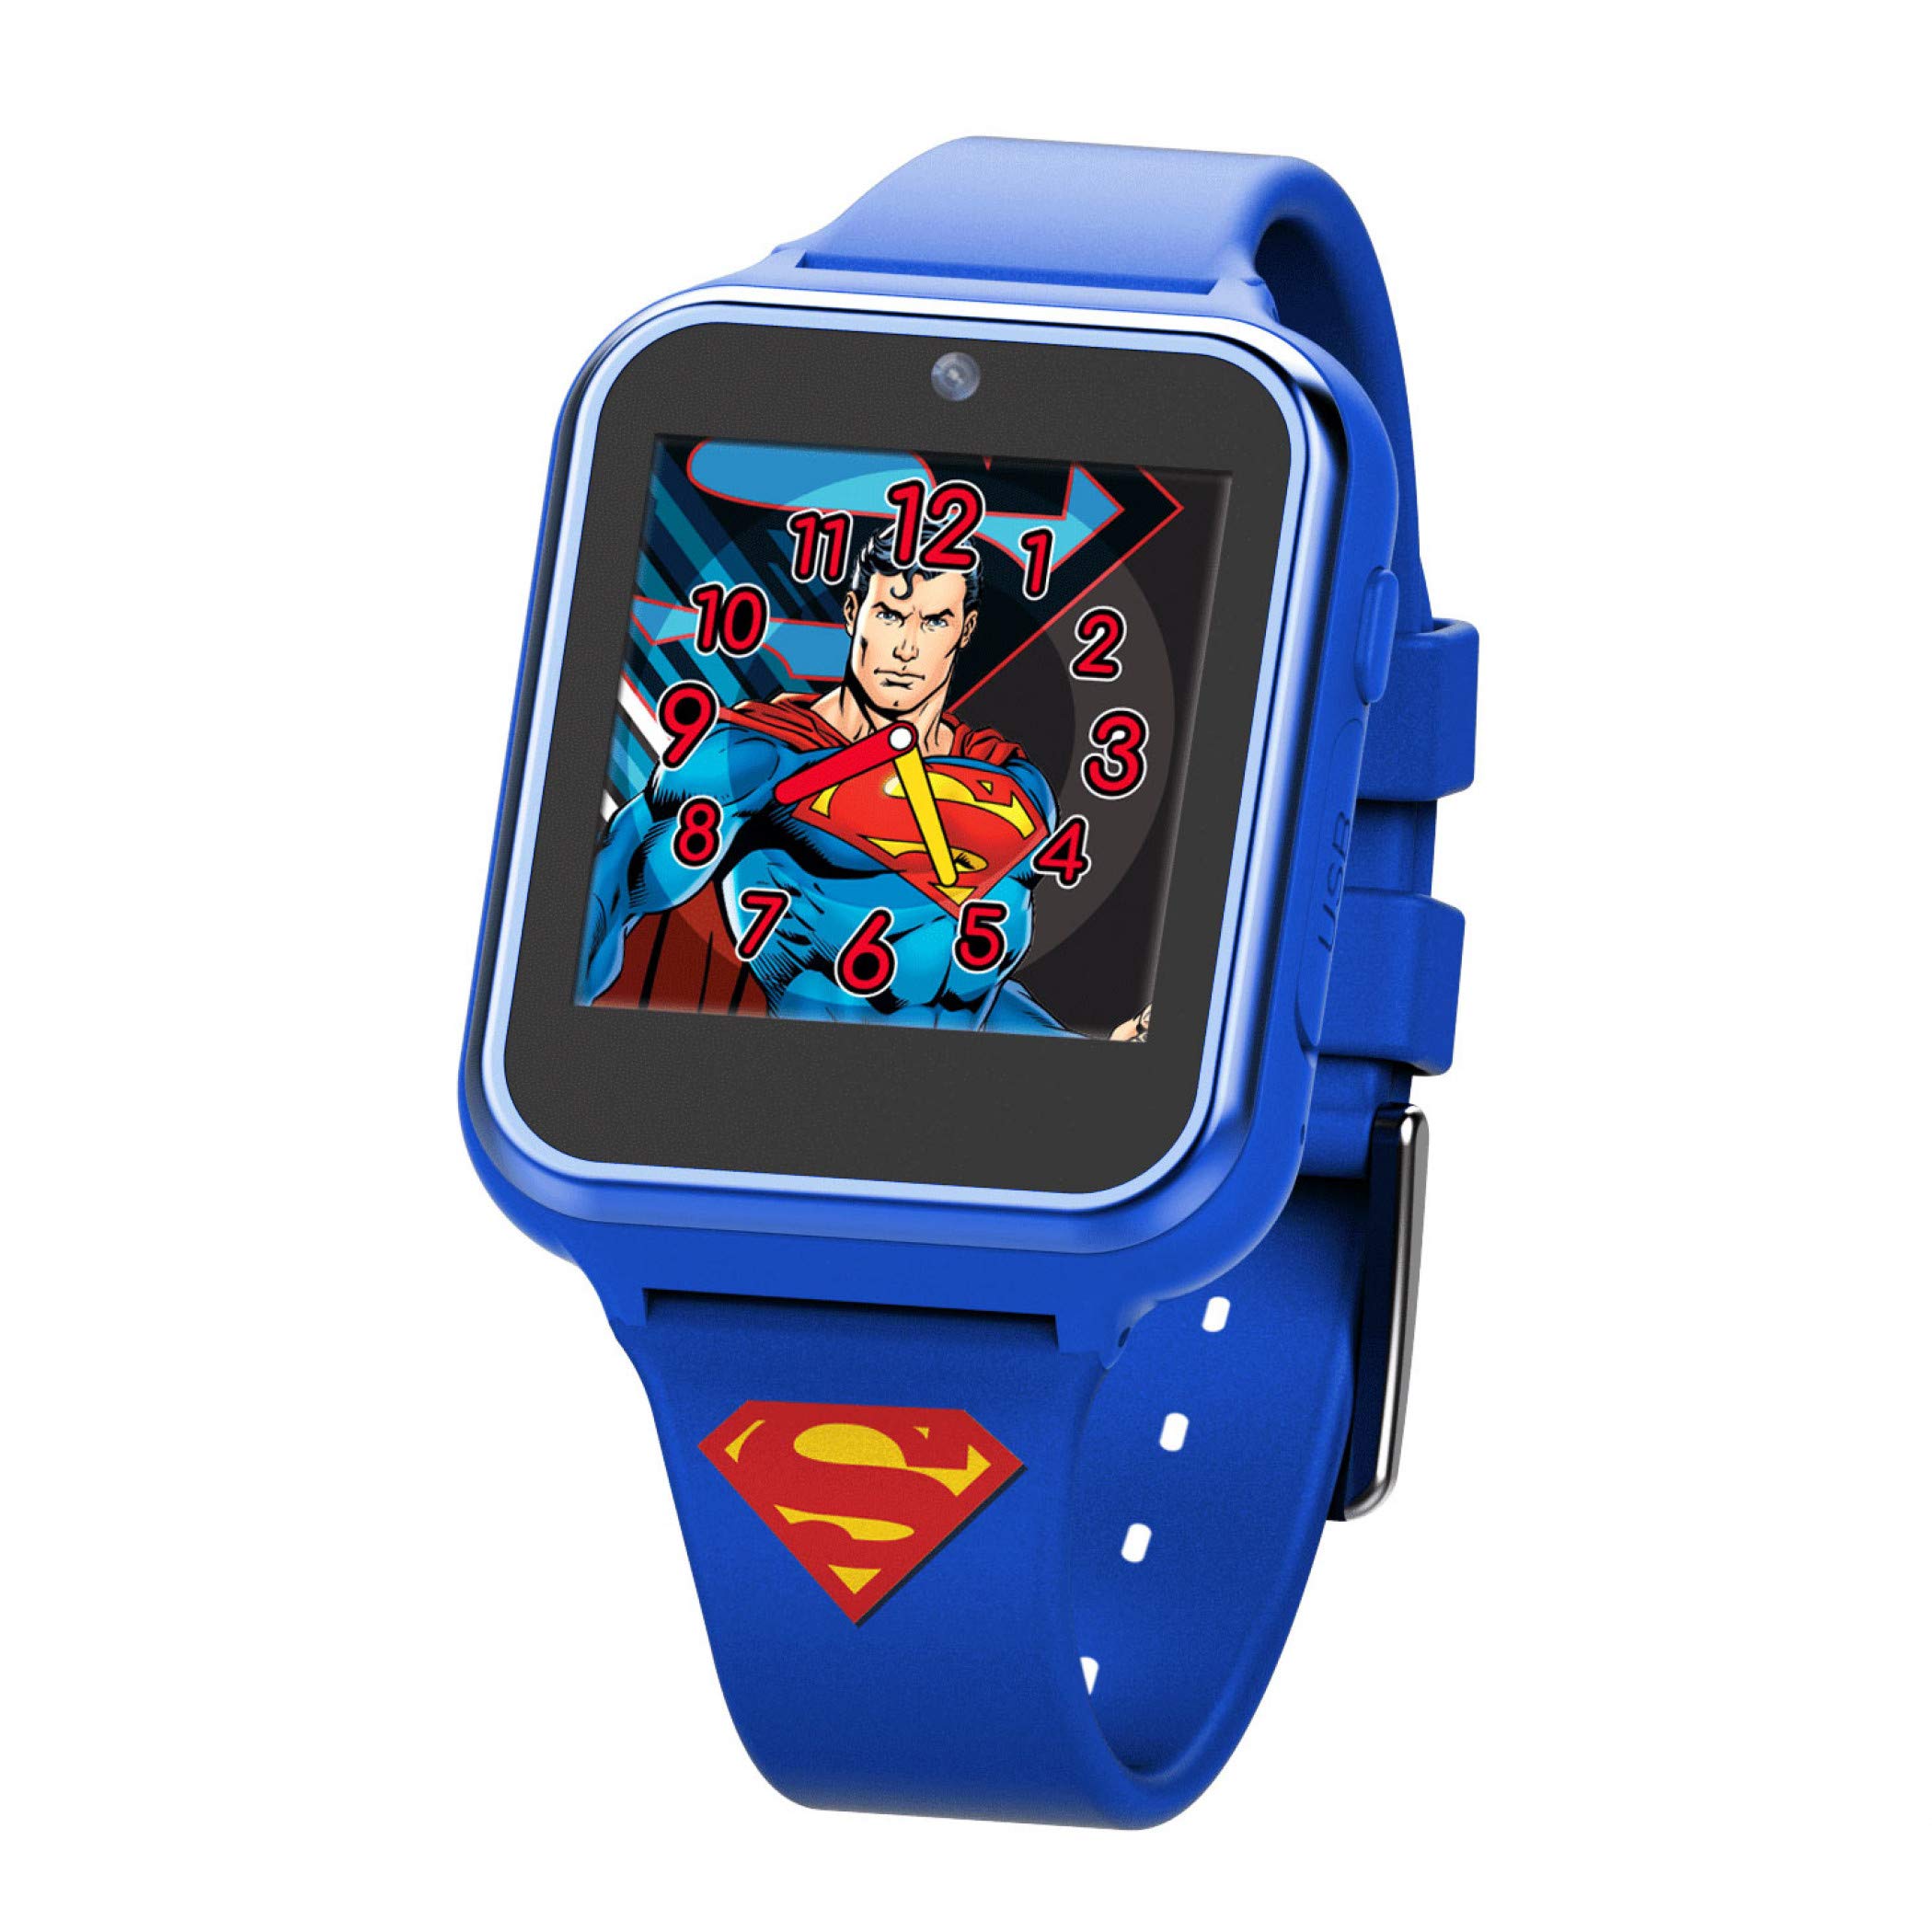 Accutime Kids DC Comics Superman Man of Steel Blue Educational Learning Touchscreen Smart Watch Toy for Boys, Girls, Toddlers - Selfie Cam, Learning Games, Pedometer and More (Model: SUP4360AZ)